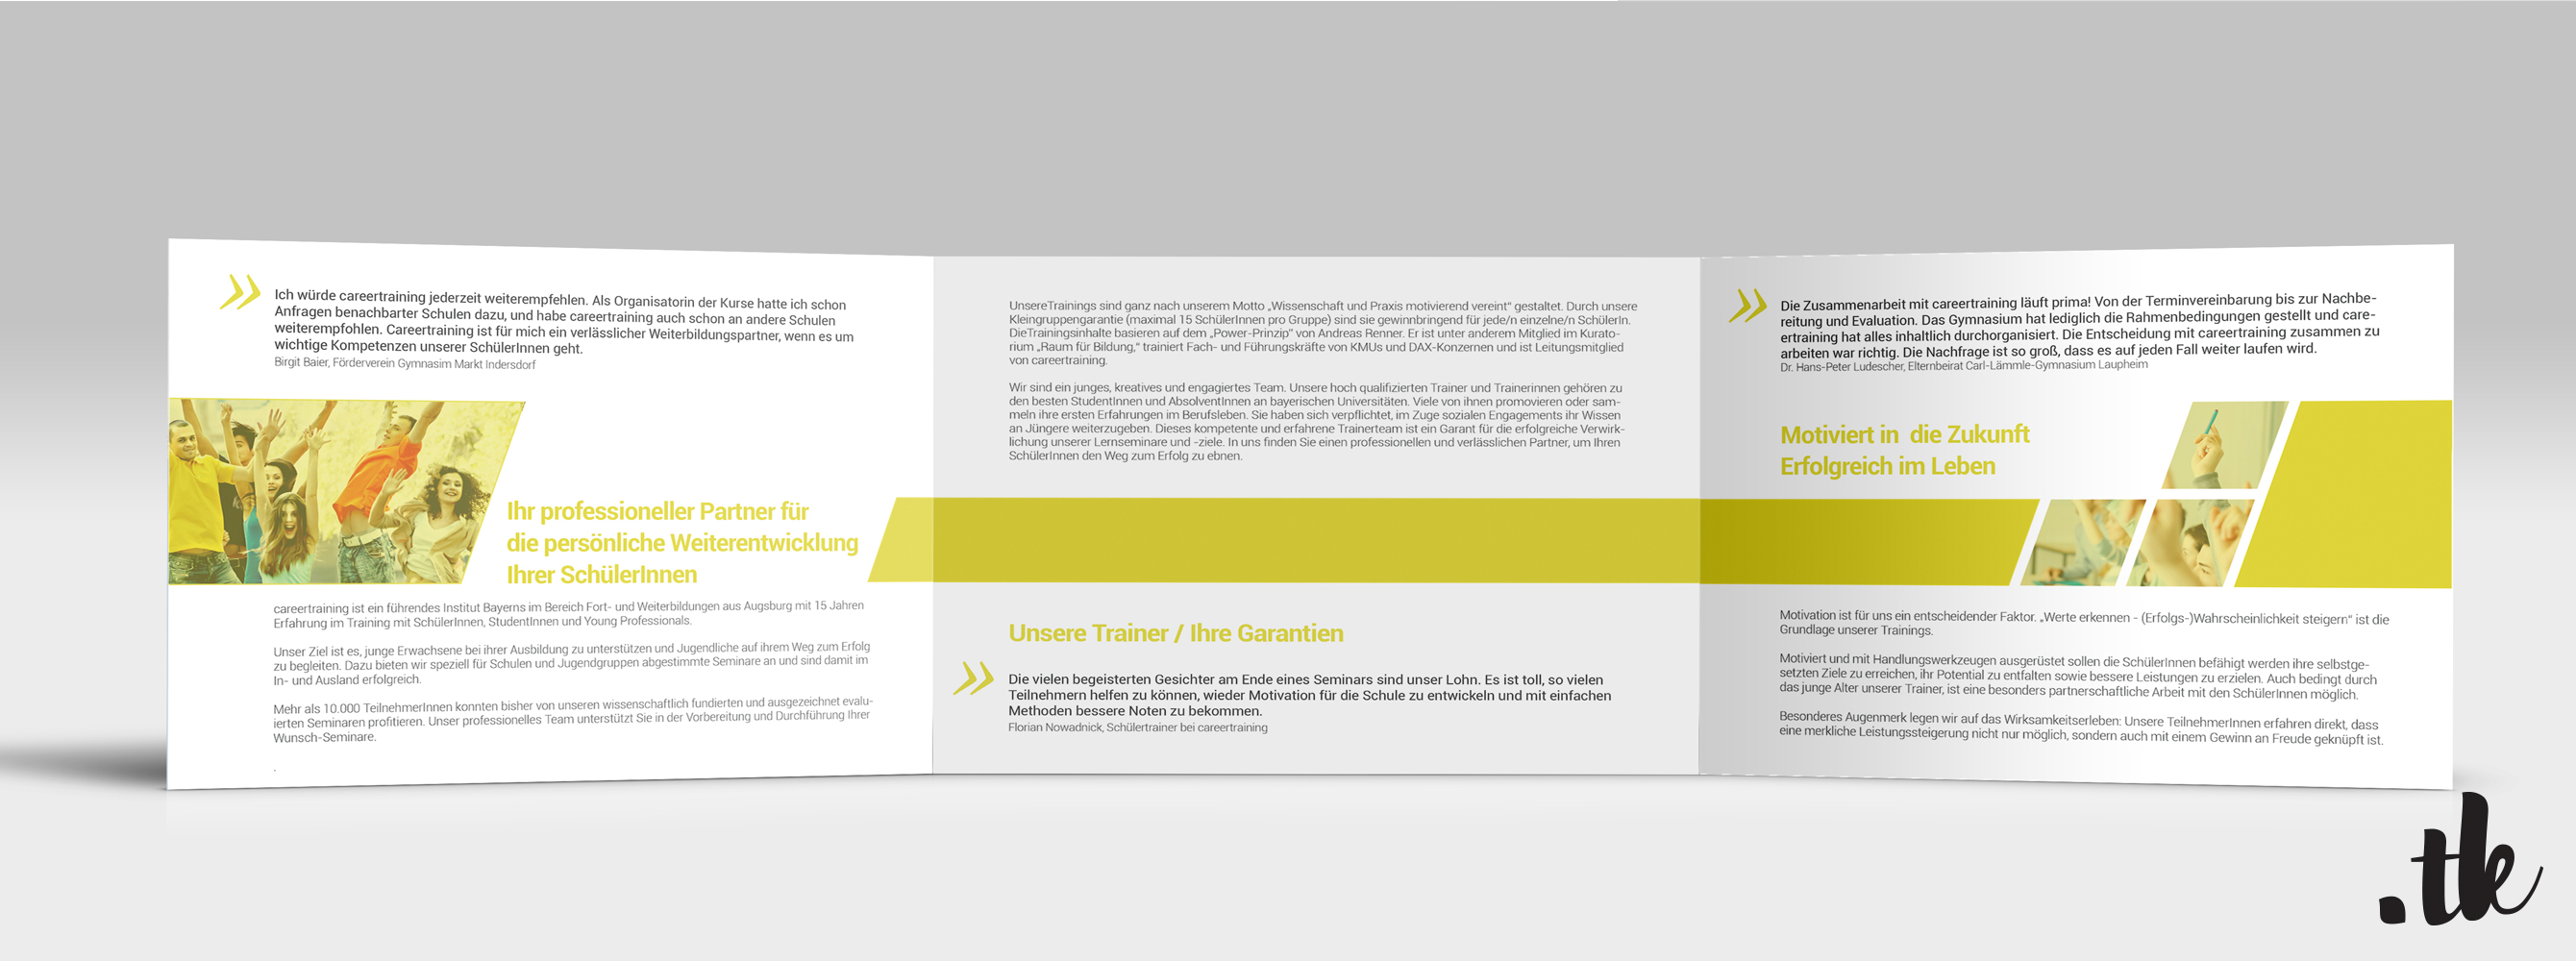 Mock Up Flyer, graphic design for careertraining, corporate design by tanja kaiser